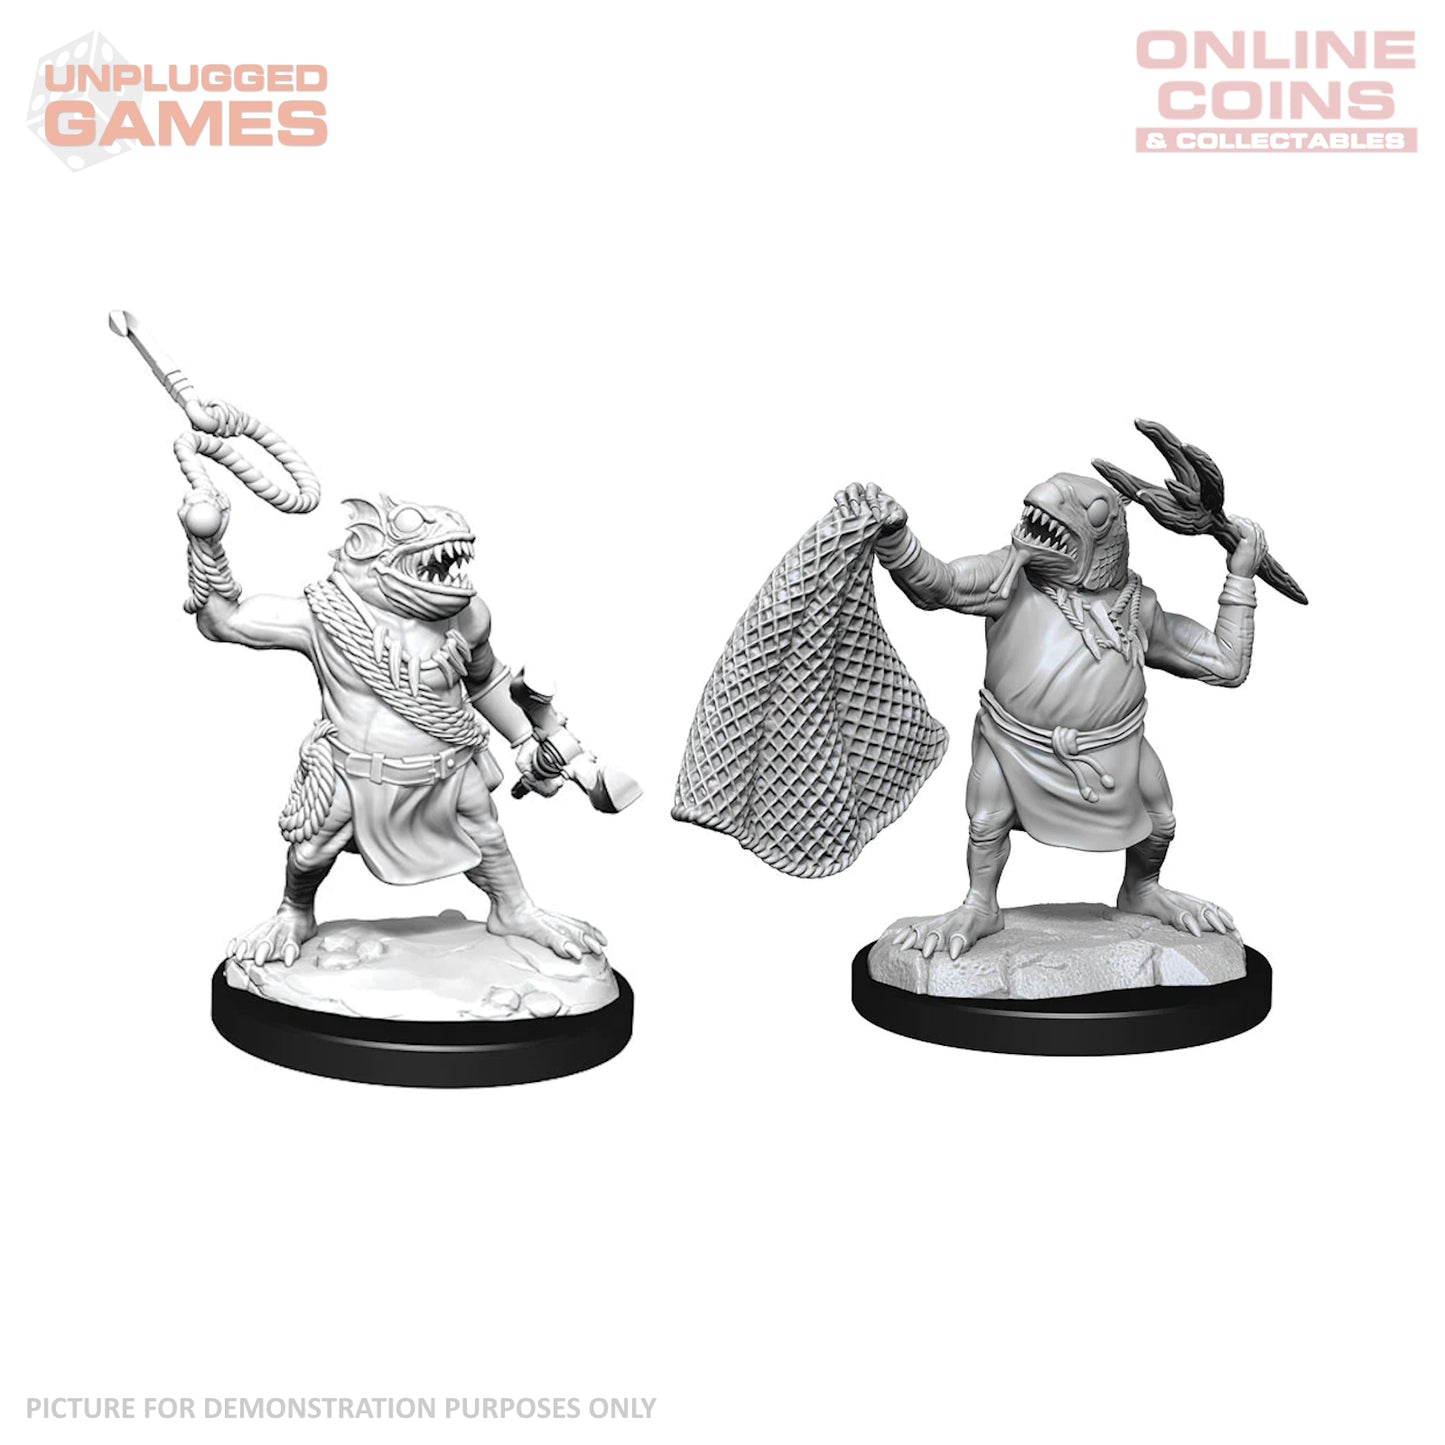 Dungeons & Dragons Nolzurs Marvelous Unpainted Miniatures - Kuo-Toa & Kuo-Tao Whip